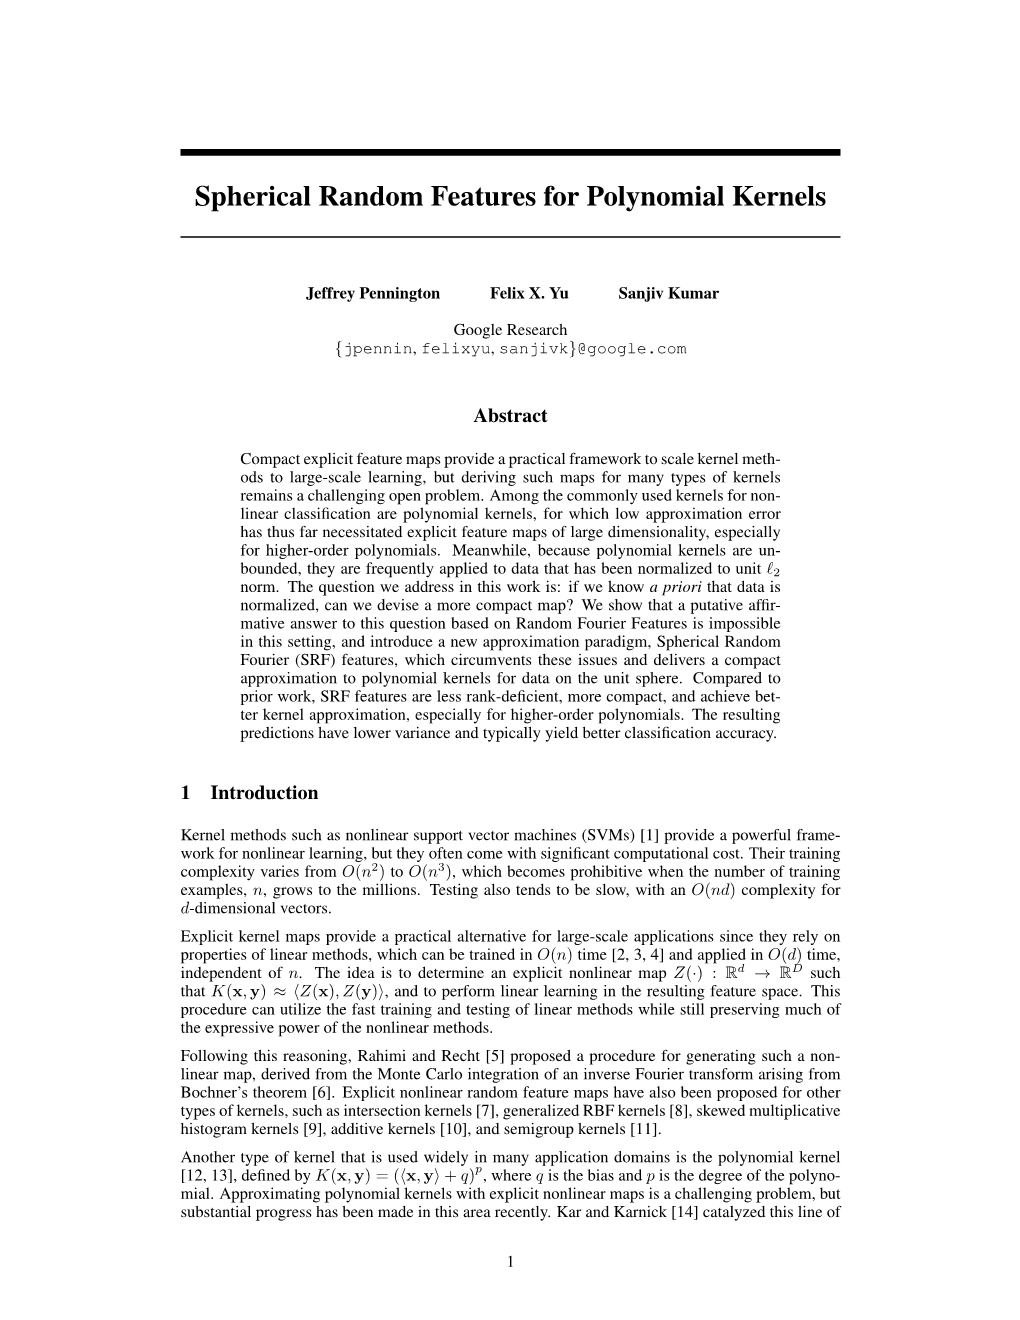 Spherical Random Features for Polynomial Kernels